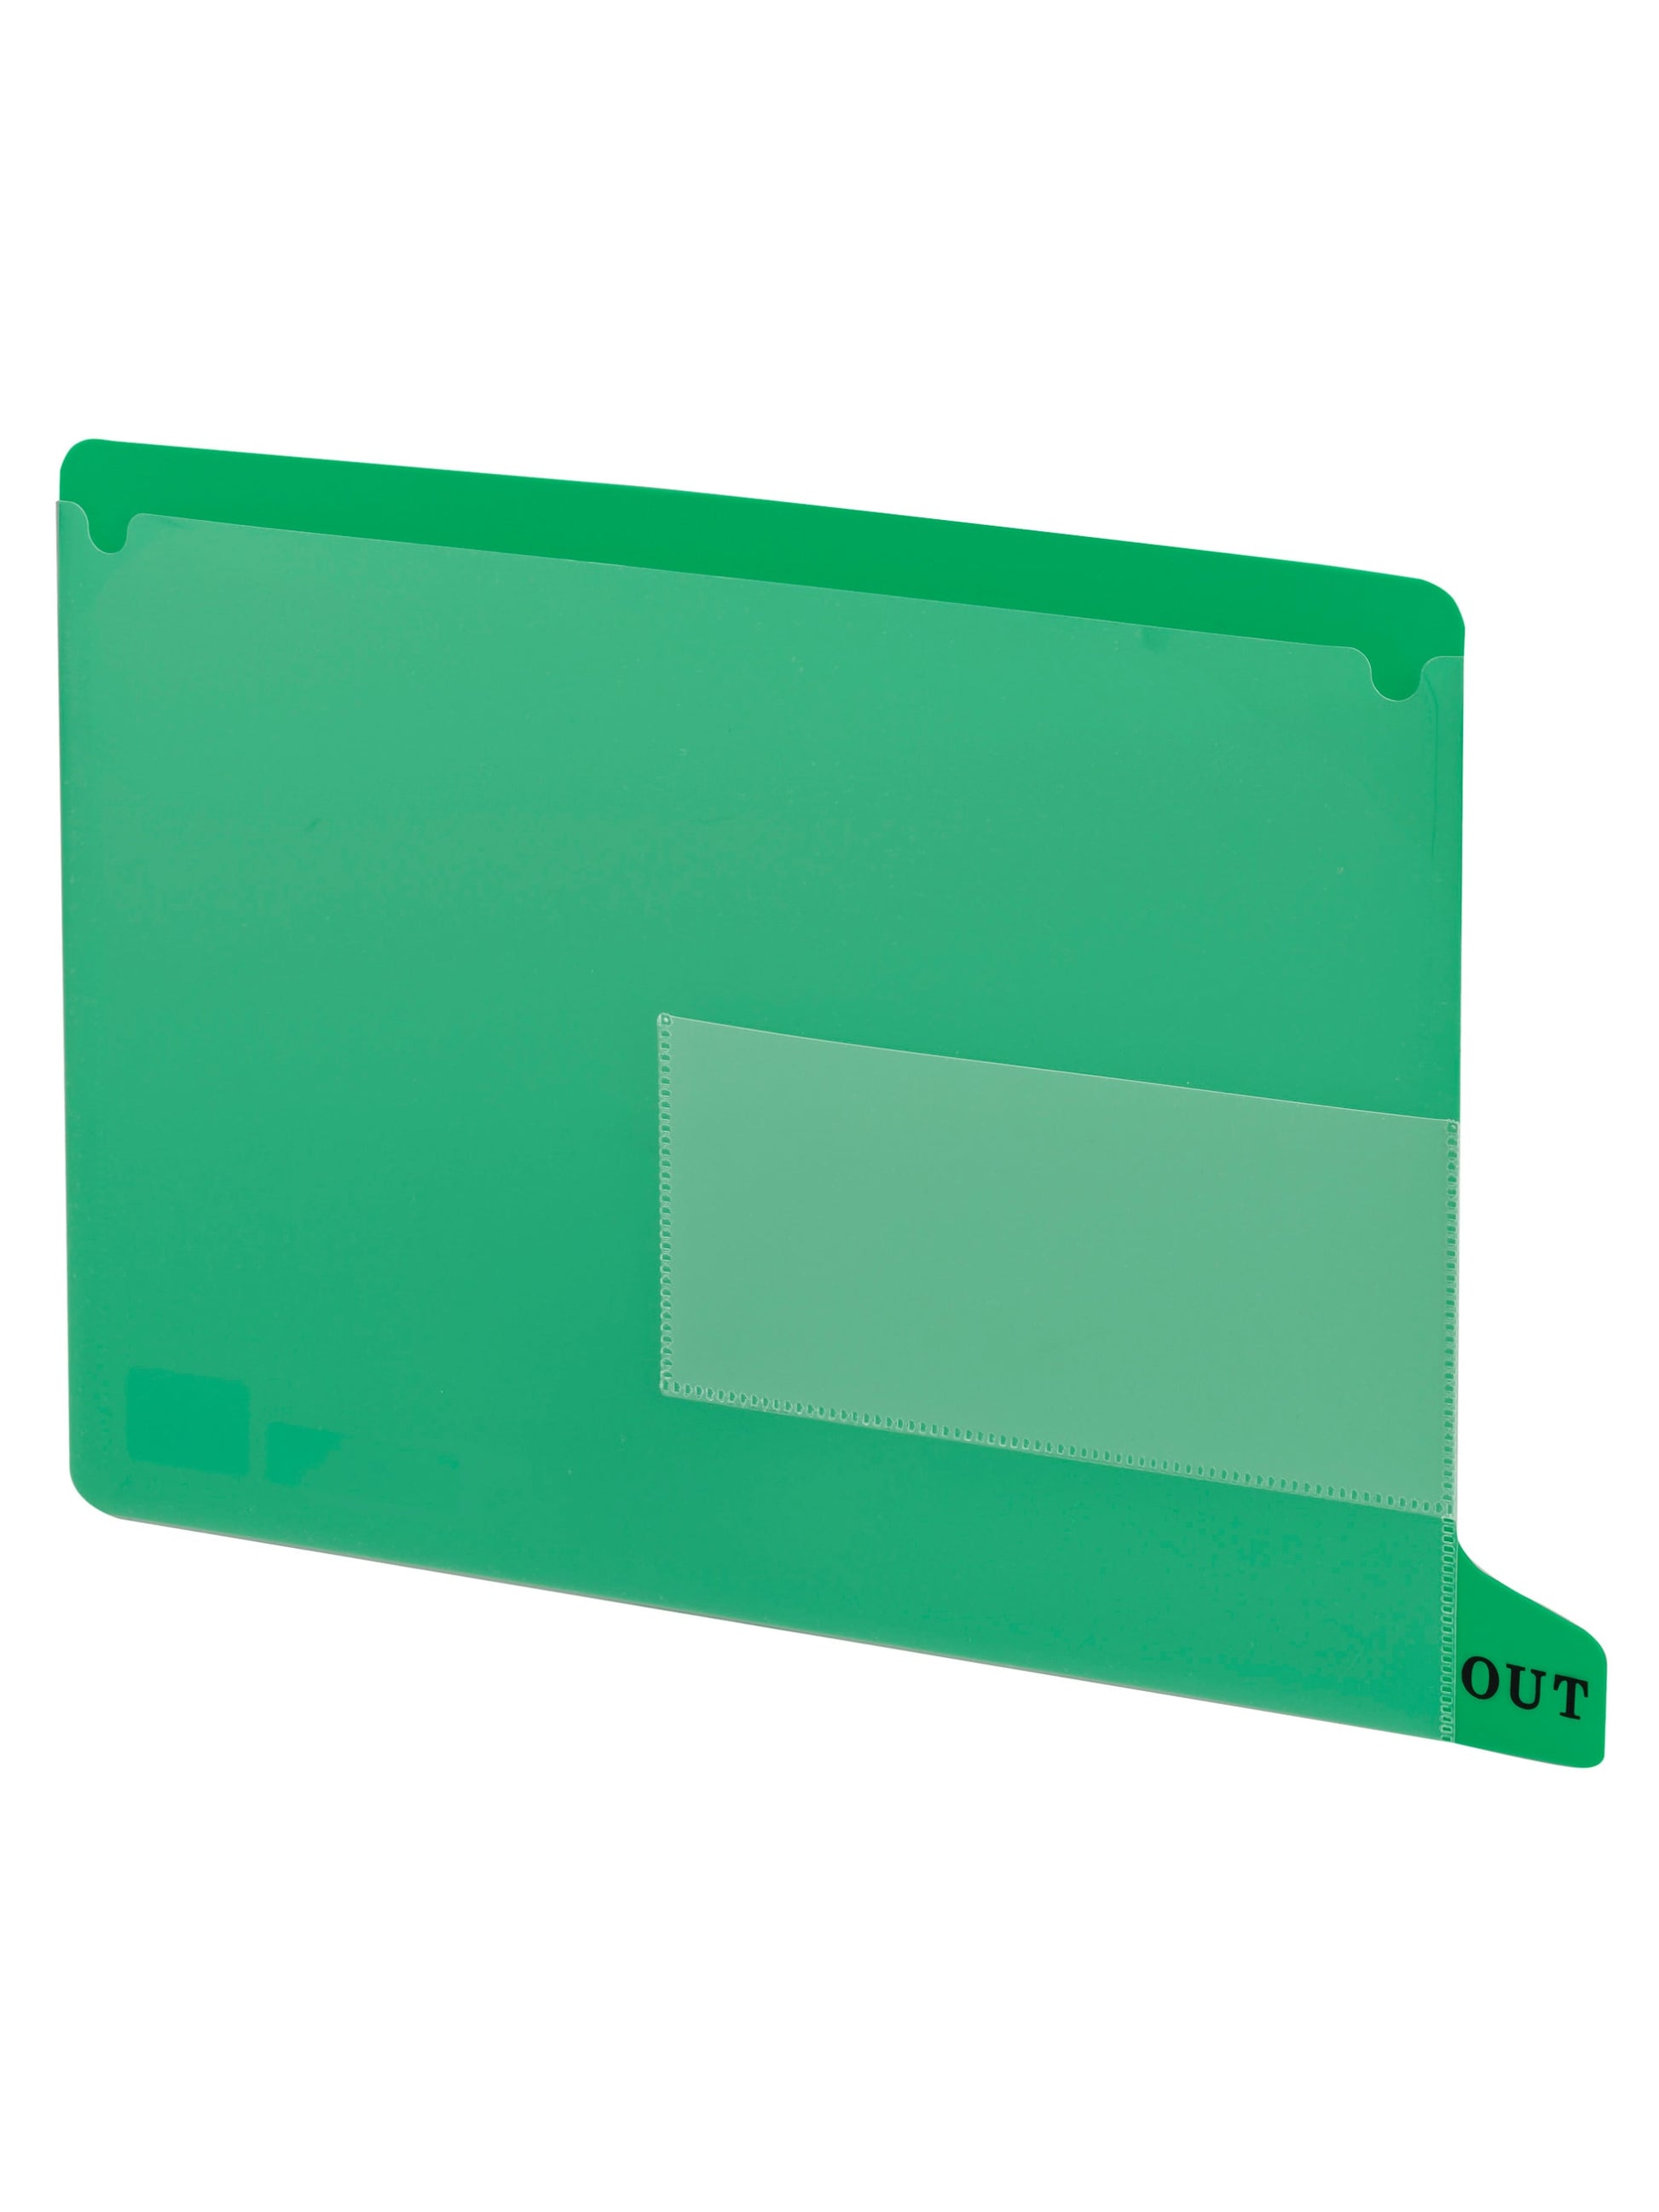 Poly End Tab Out-Guides, Green Color, Letter Size, Set of 25, 086486619523